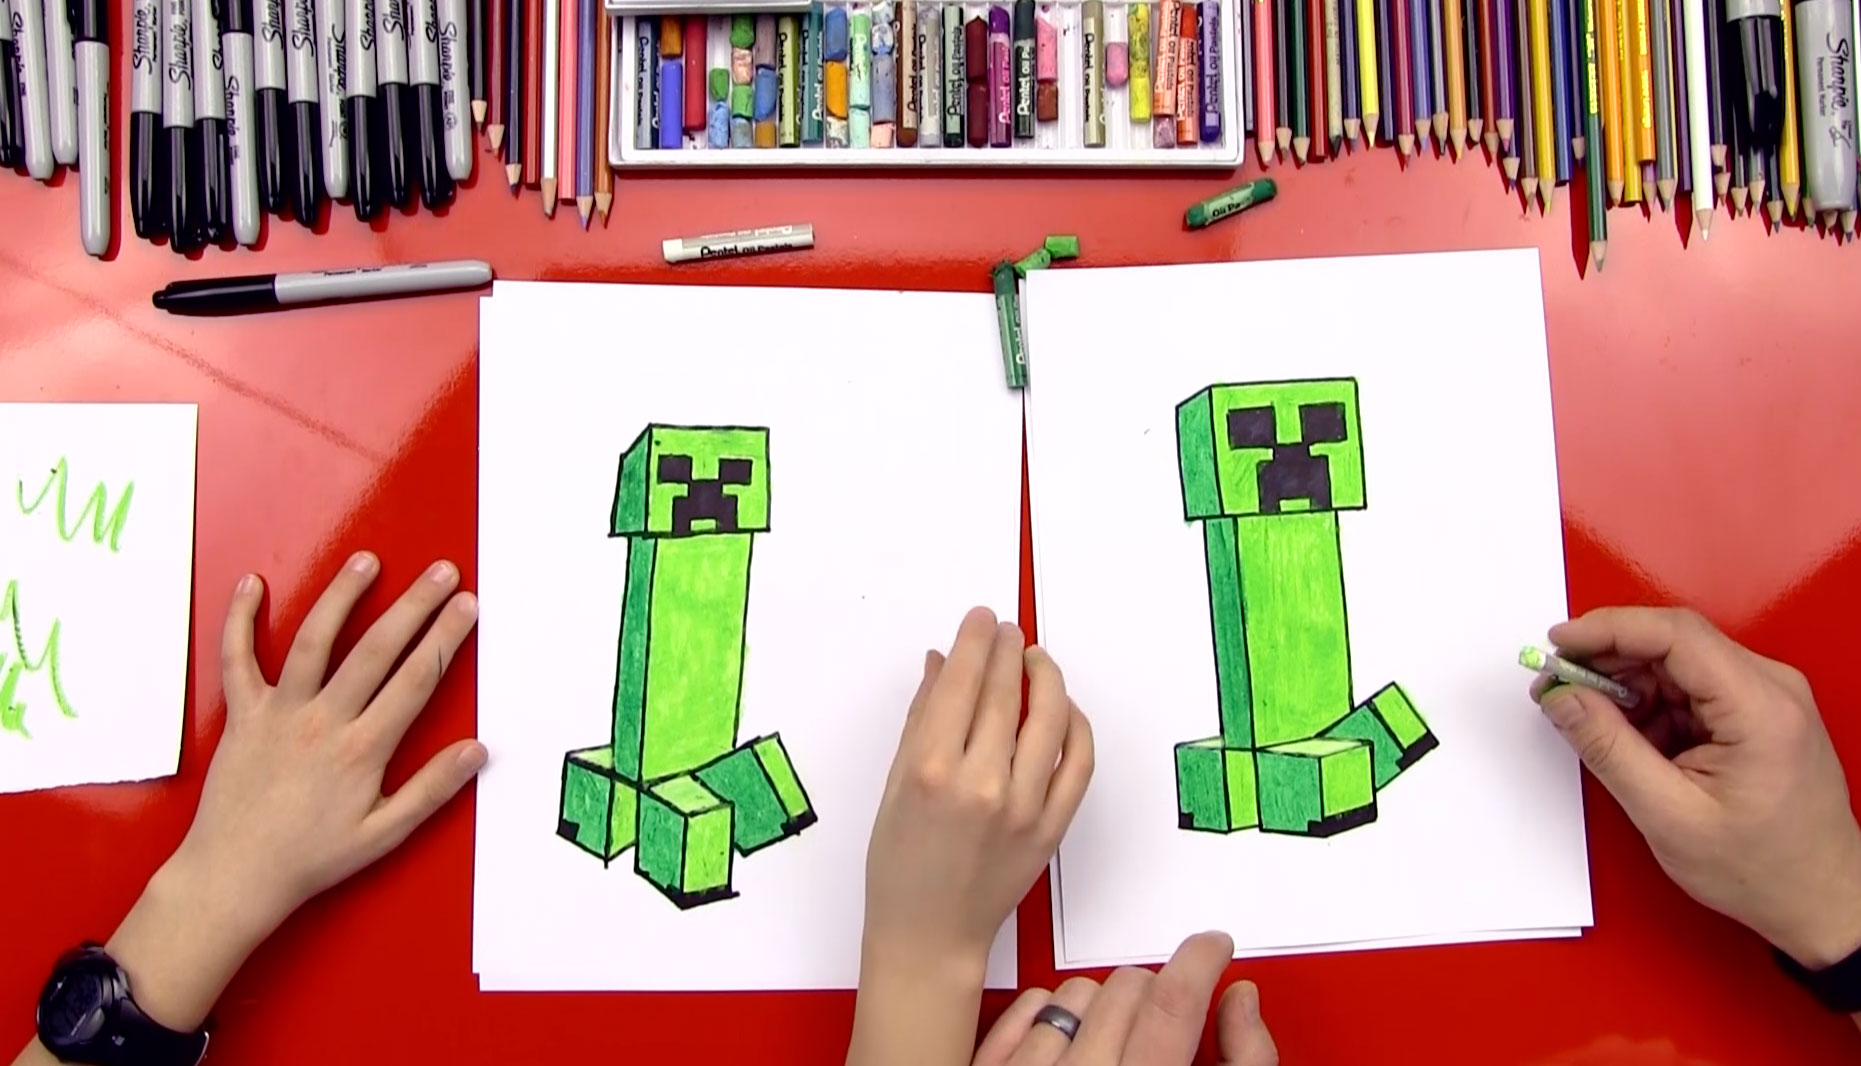 How To Make A Papercraft Creeper From Minecraft - Art For Kids Hub 